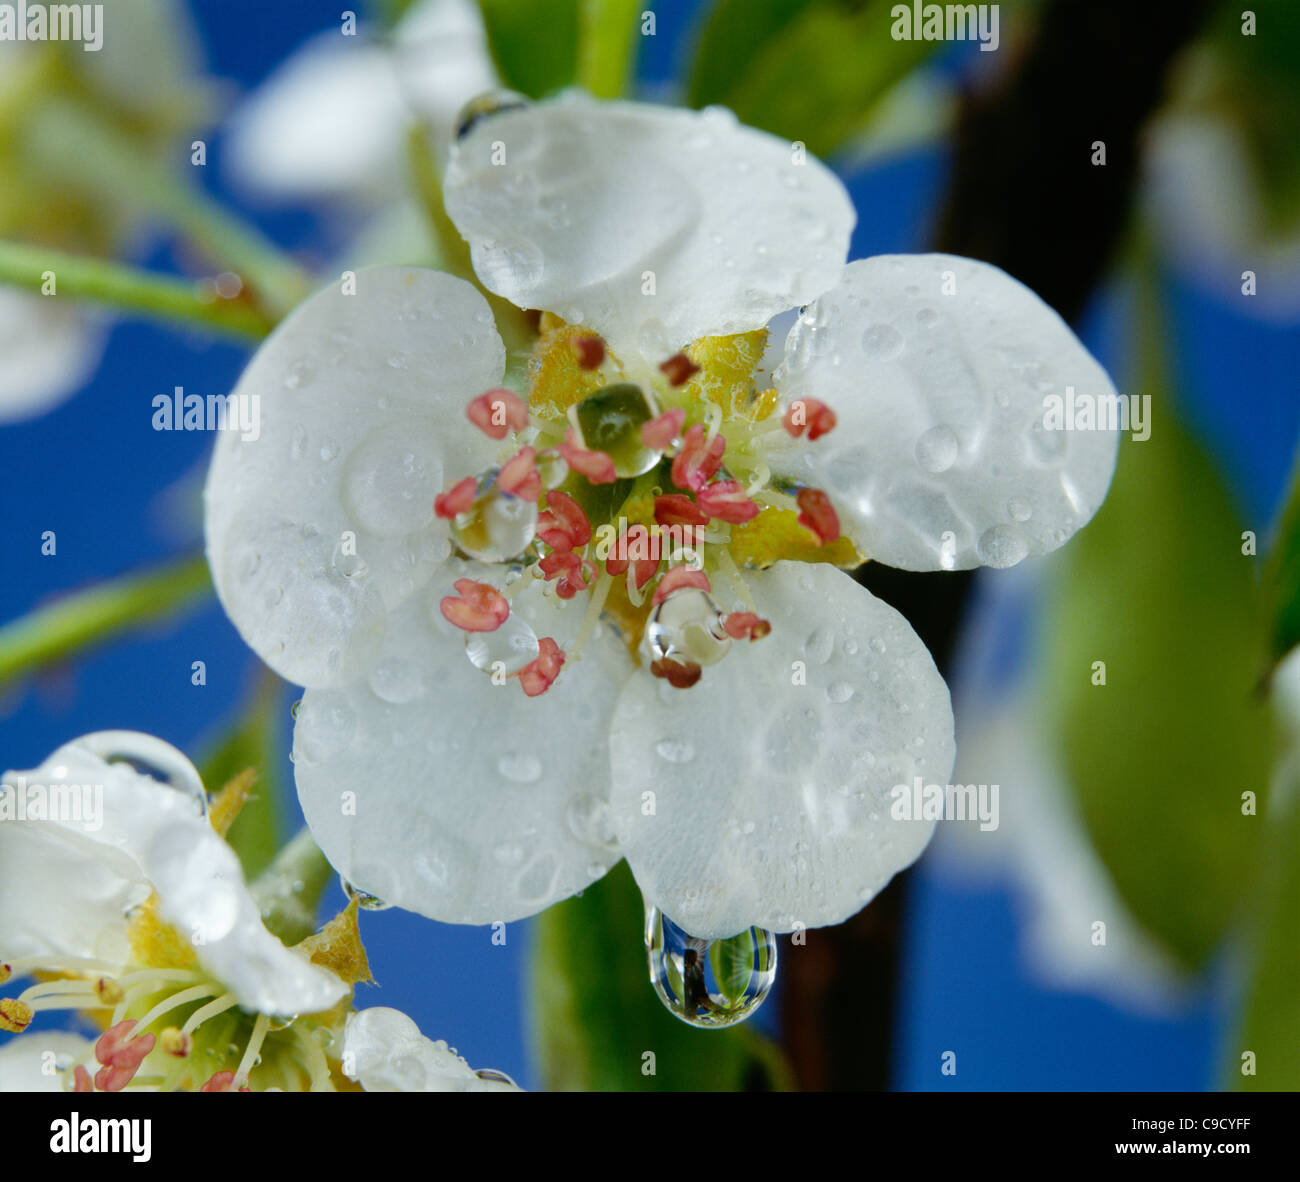 Bartlett pear blossoms showing petals, pistils and stamens. Stock Photo